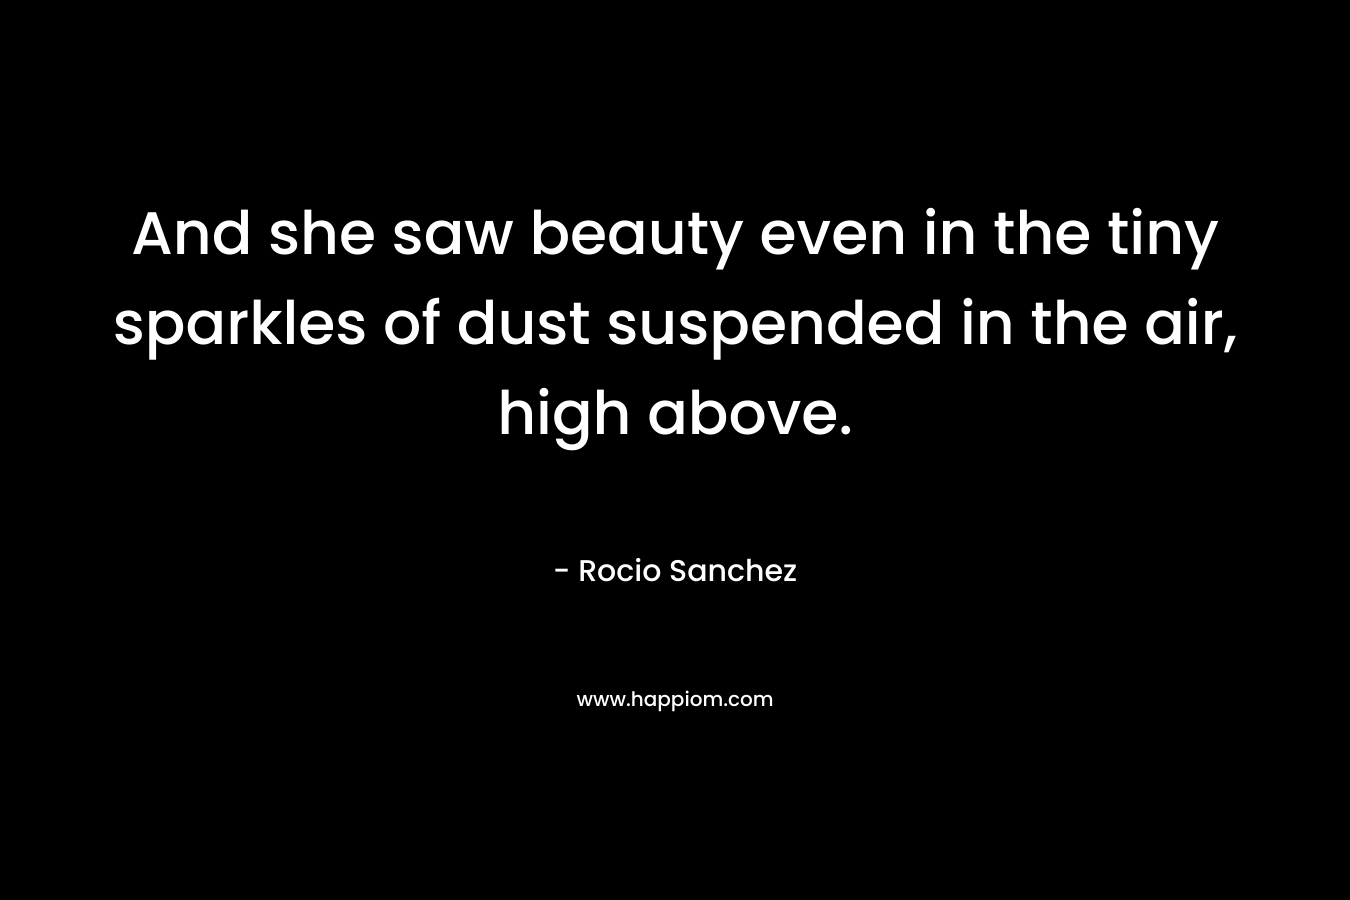 And she saw beauty even in the tiny sparkles of dust suspended in the air, high above. – Rocio Sanchez